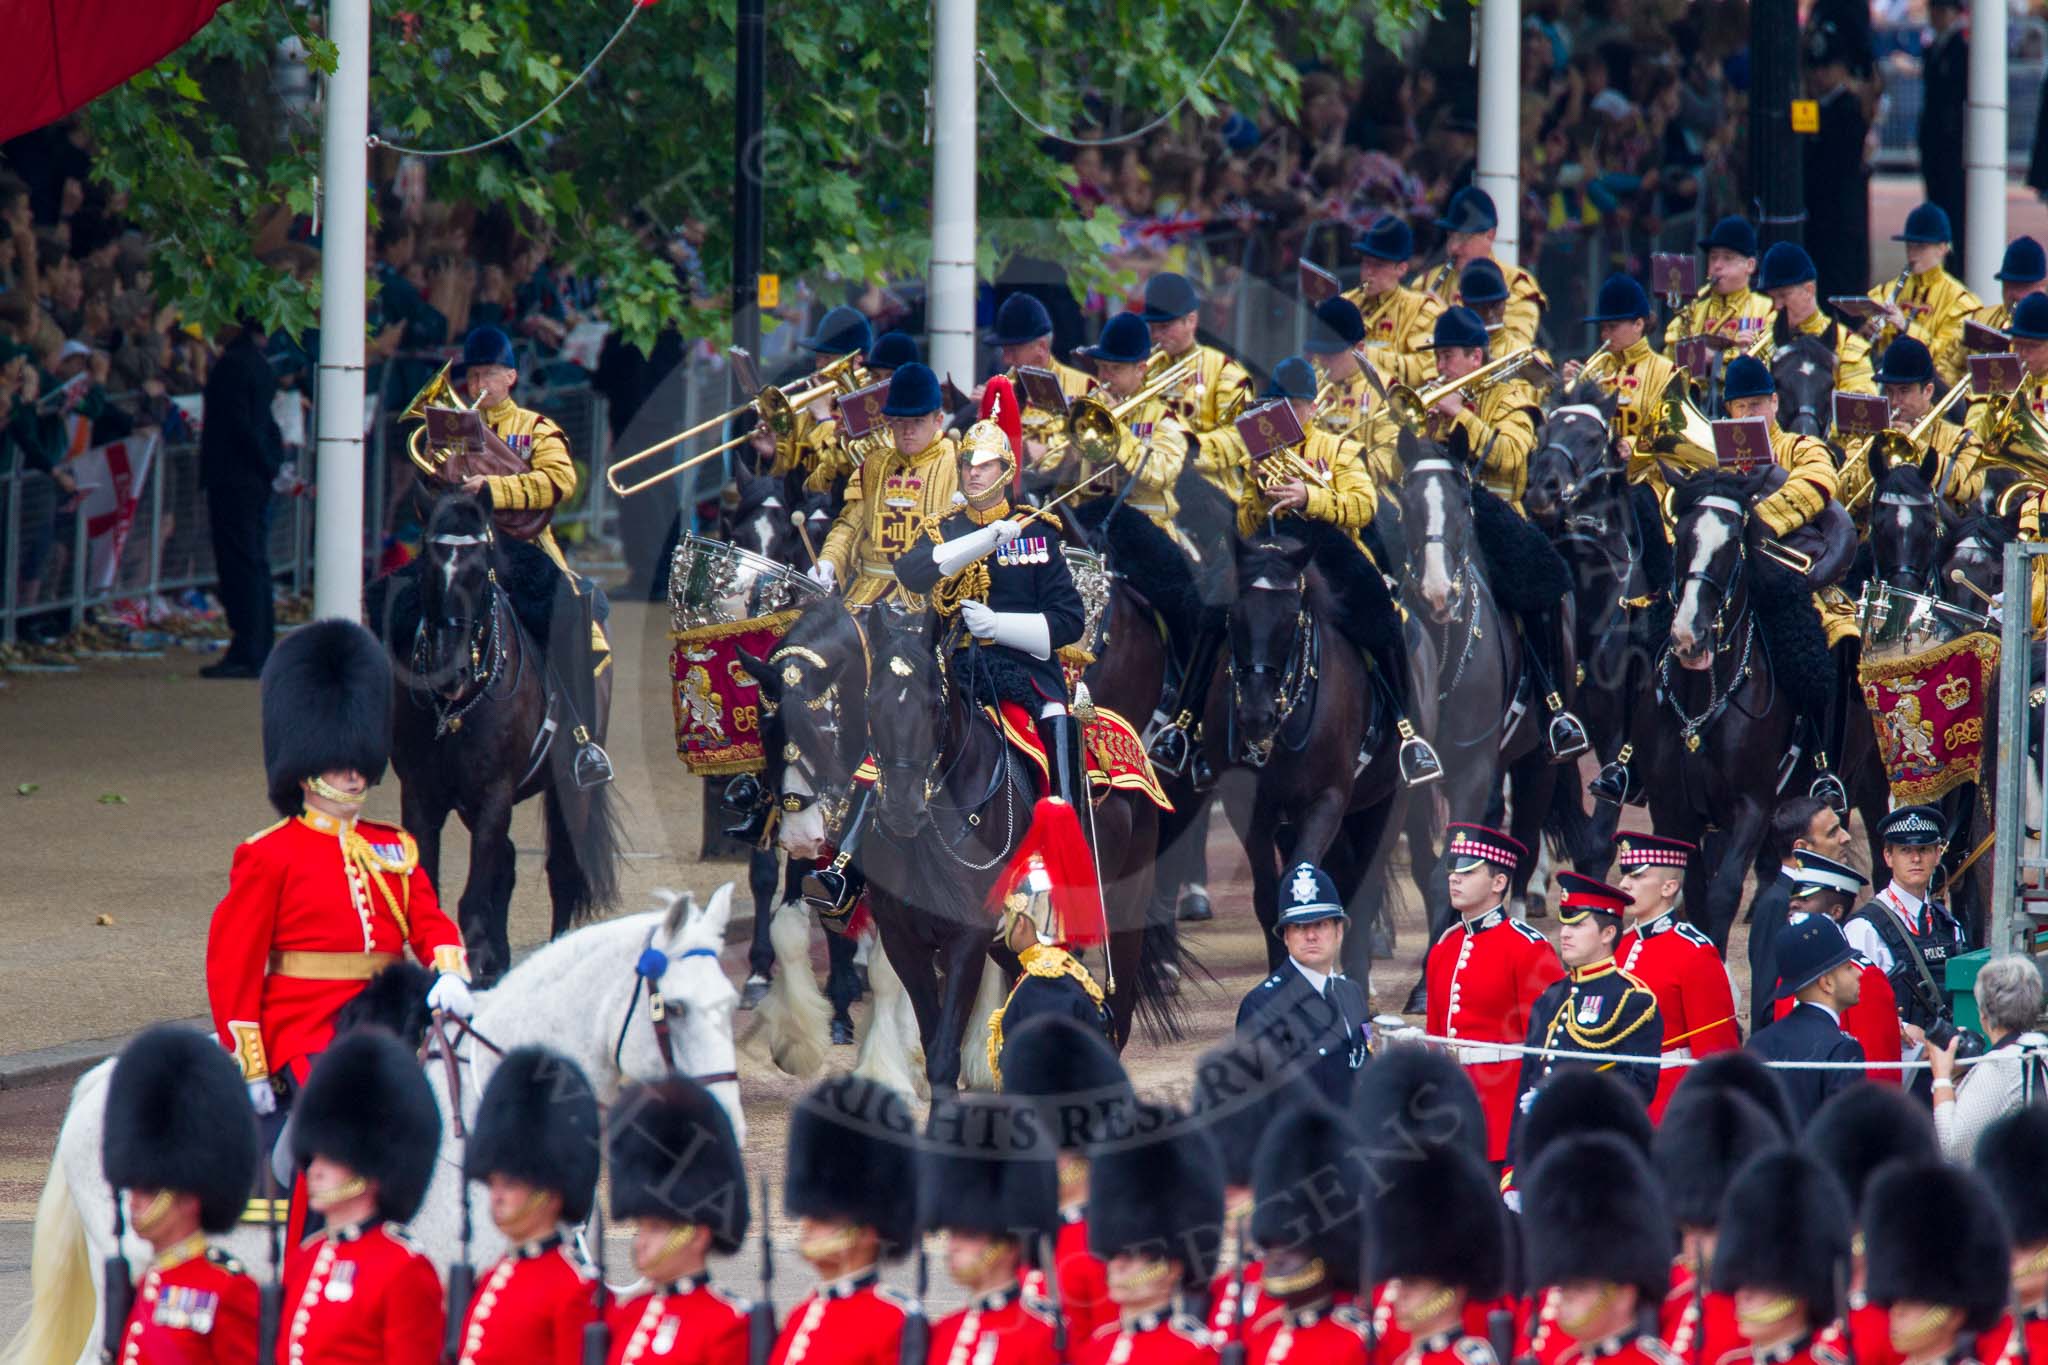 Trooping the Colour 2014.
Horse Guards Parade, Westminster,
London SW1A,

United Kingdom,
on 14 June 2014 at 10:56, image #310